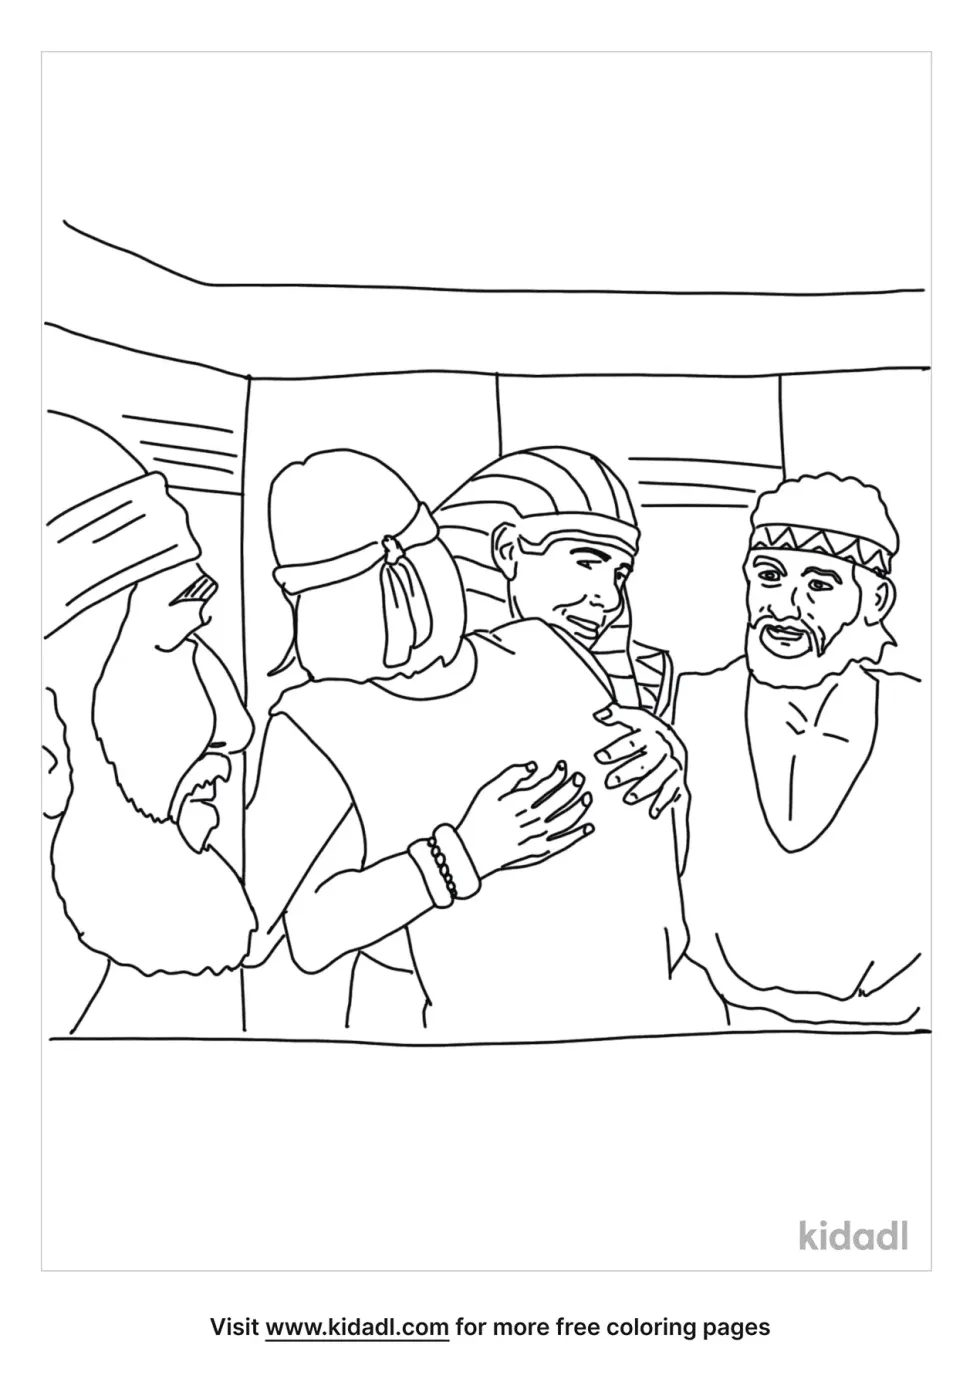 Joseph And His Brothers Coloring Page